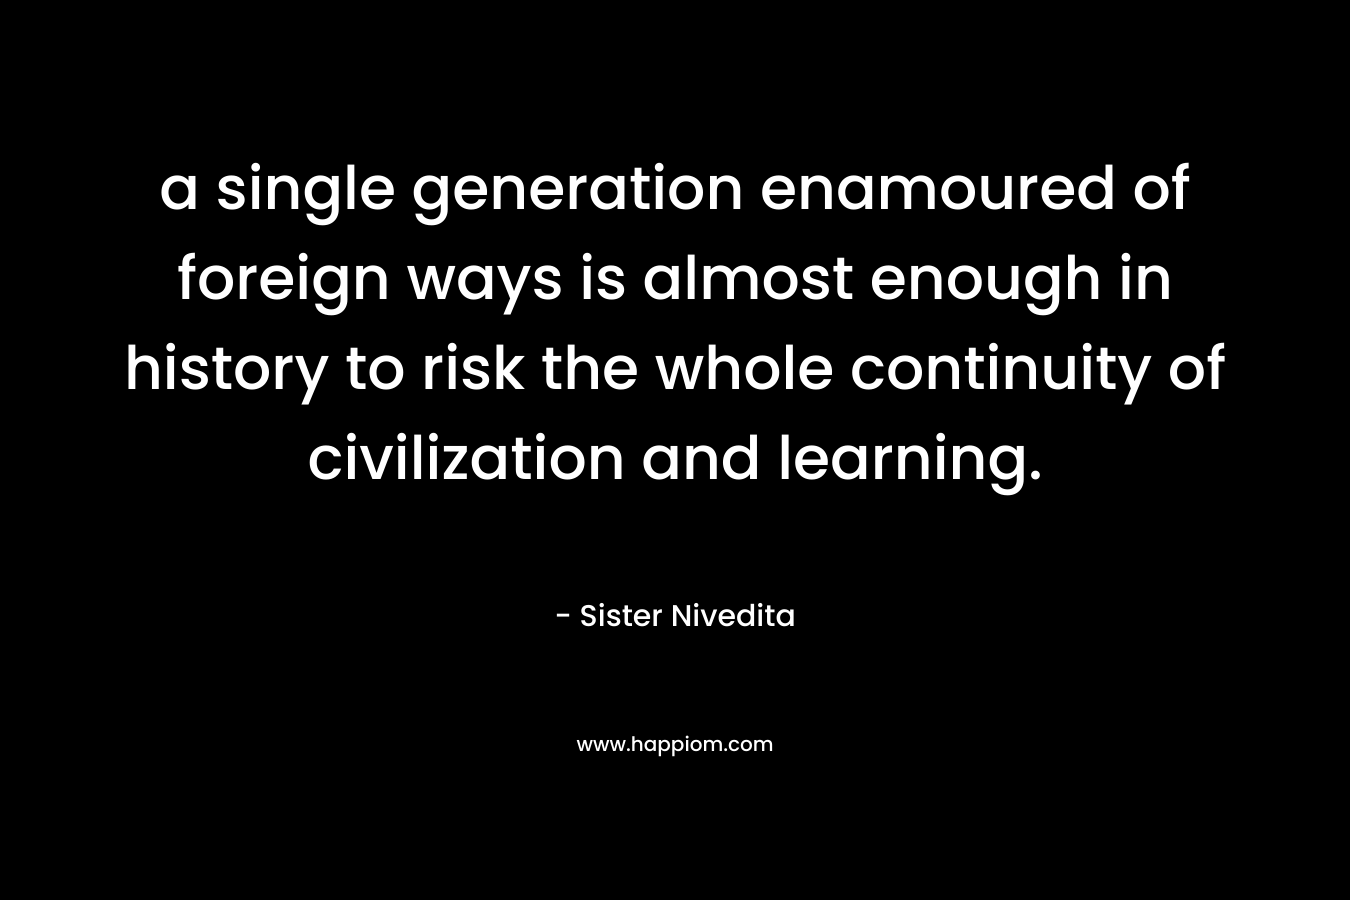 a single generation enamoured of foreign ways is almost enough in history to risk the whole continuity of civilization and learning. – Sister Nivedita